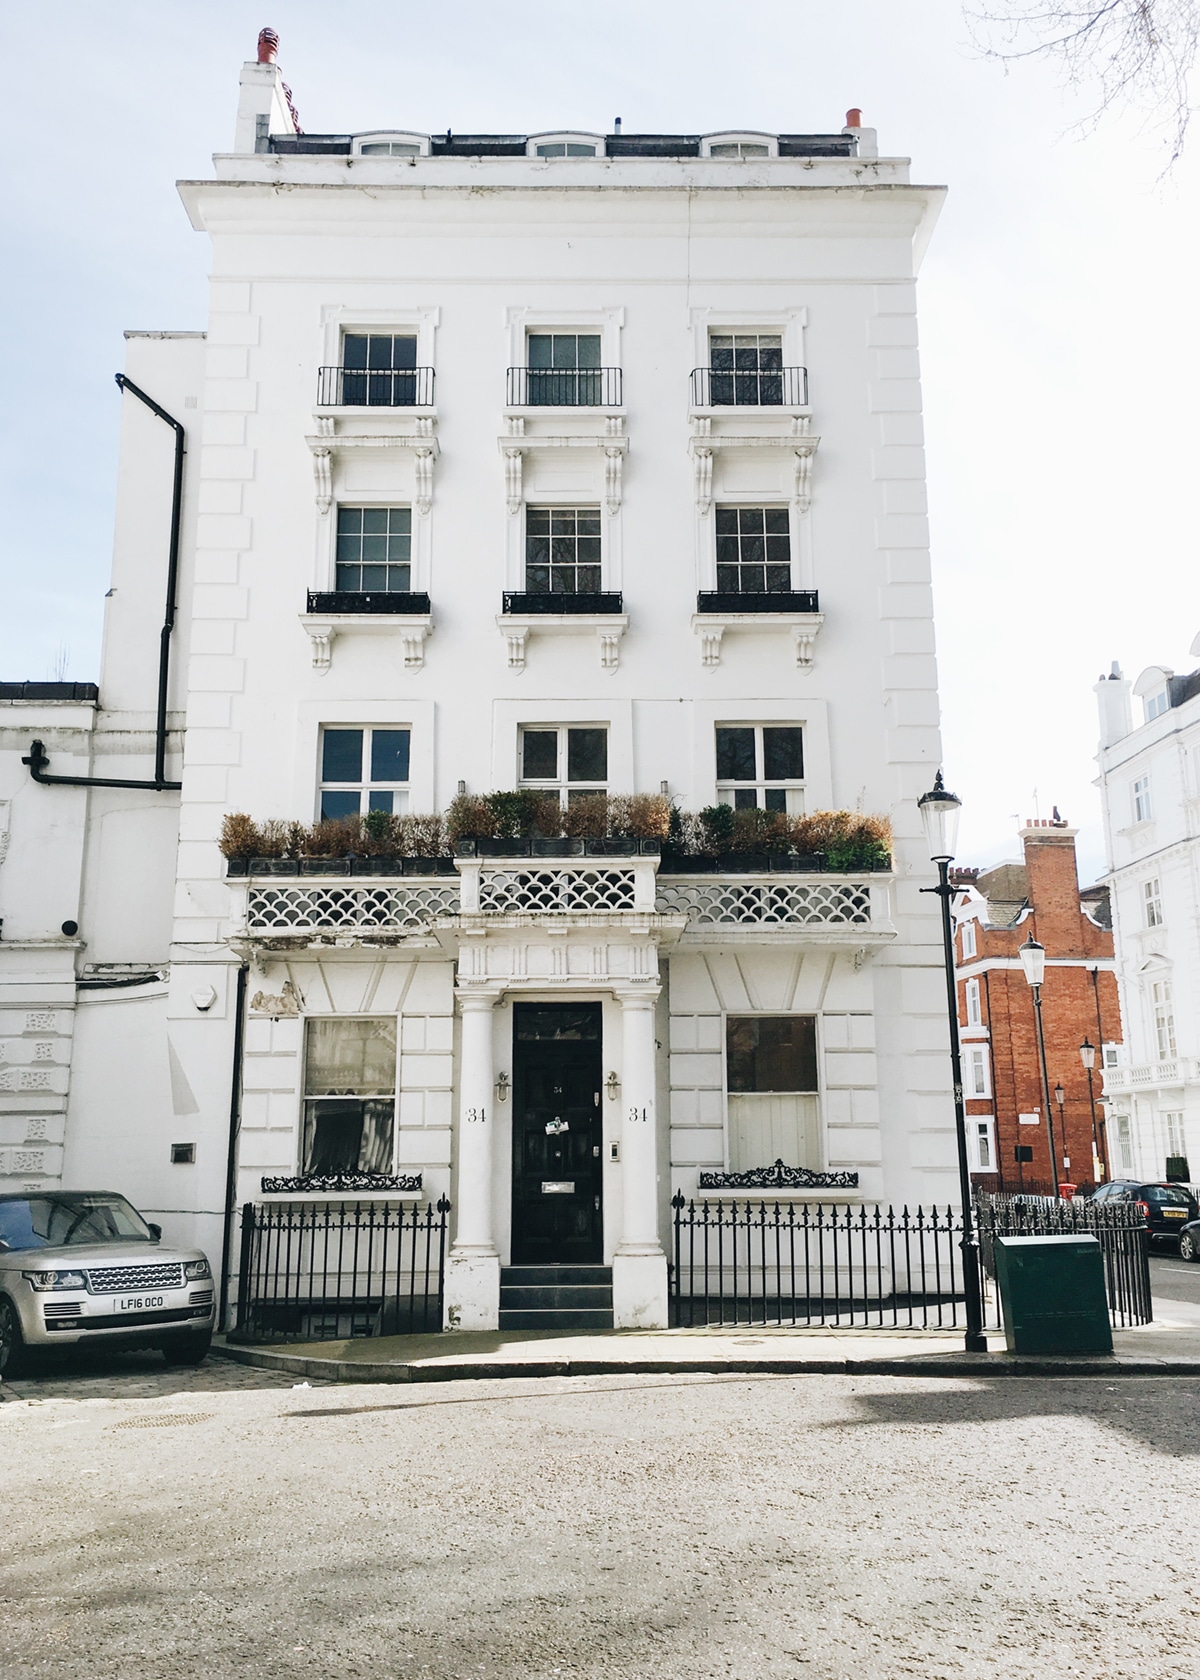 beautiful homes on the streets of london | coco kelley